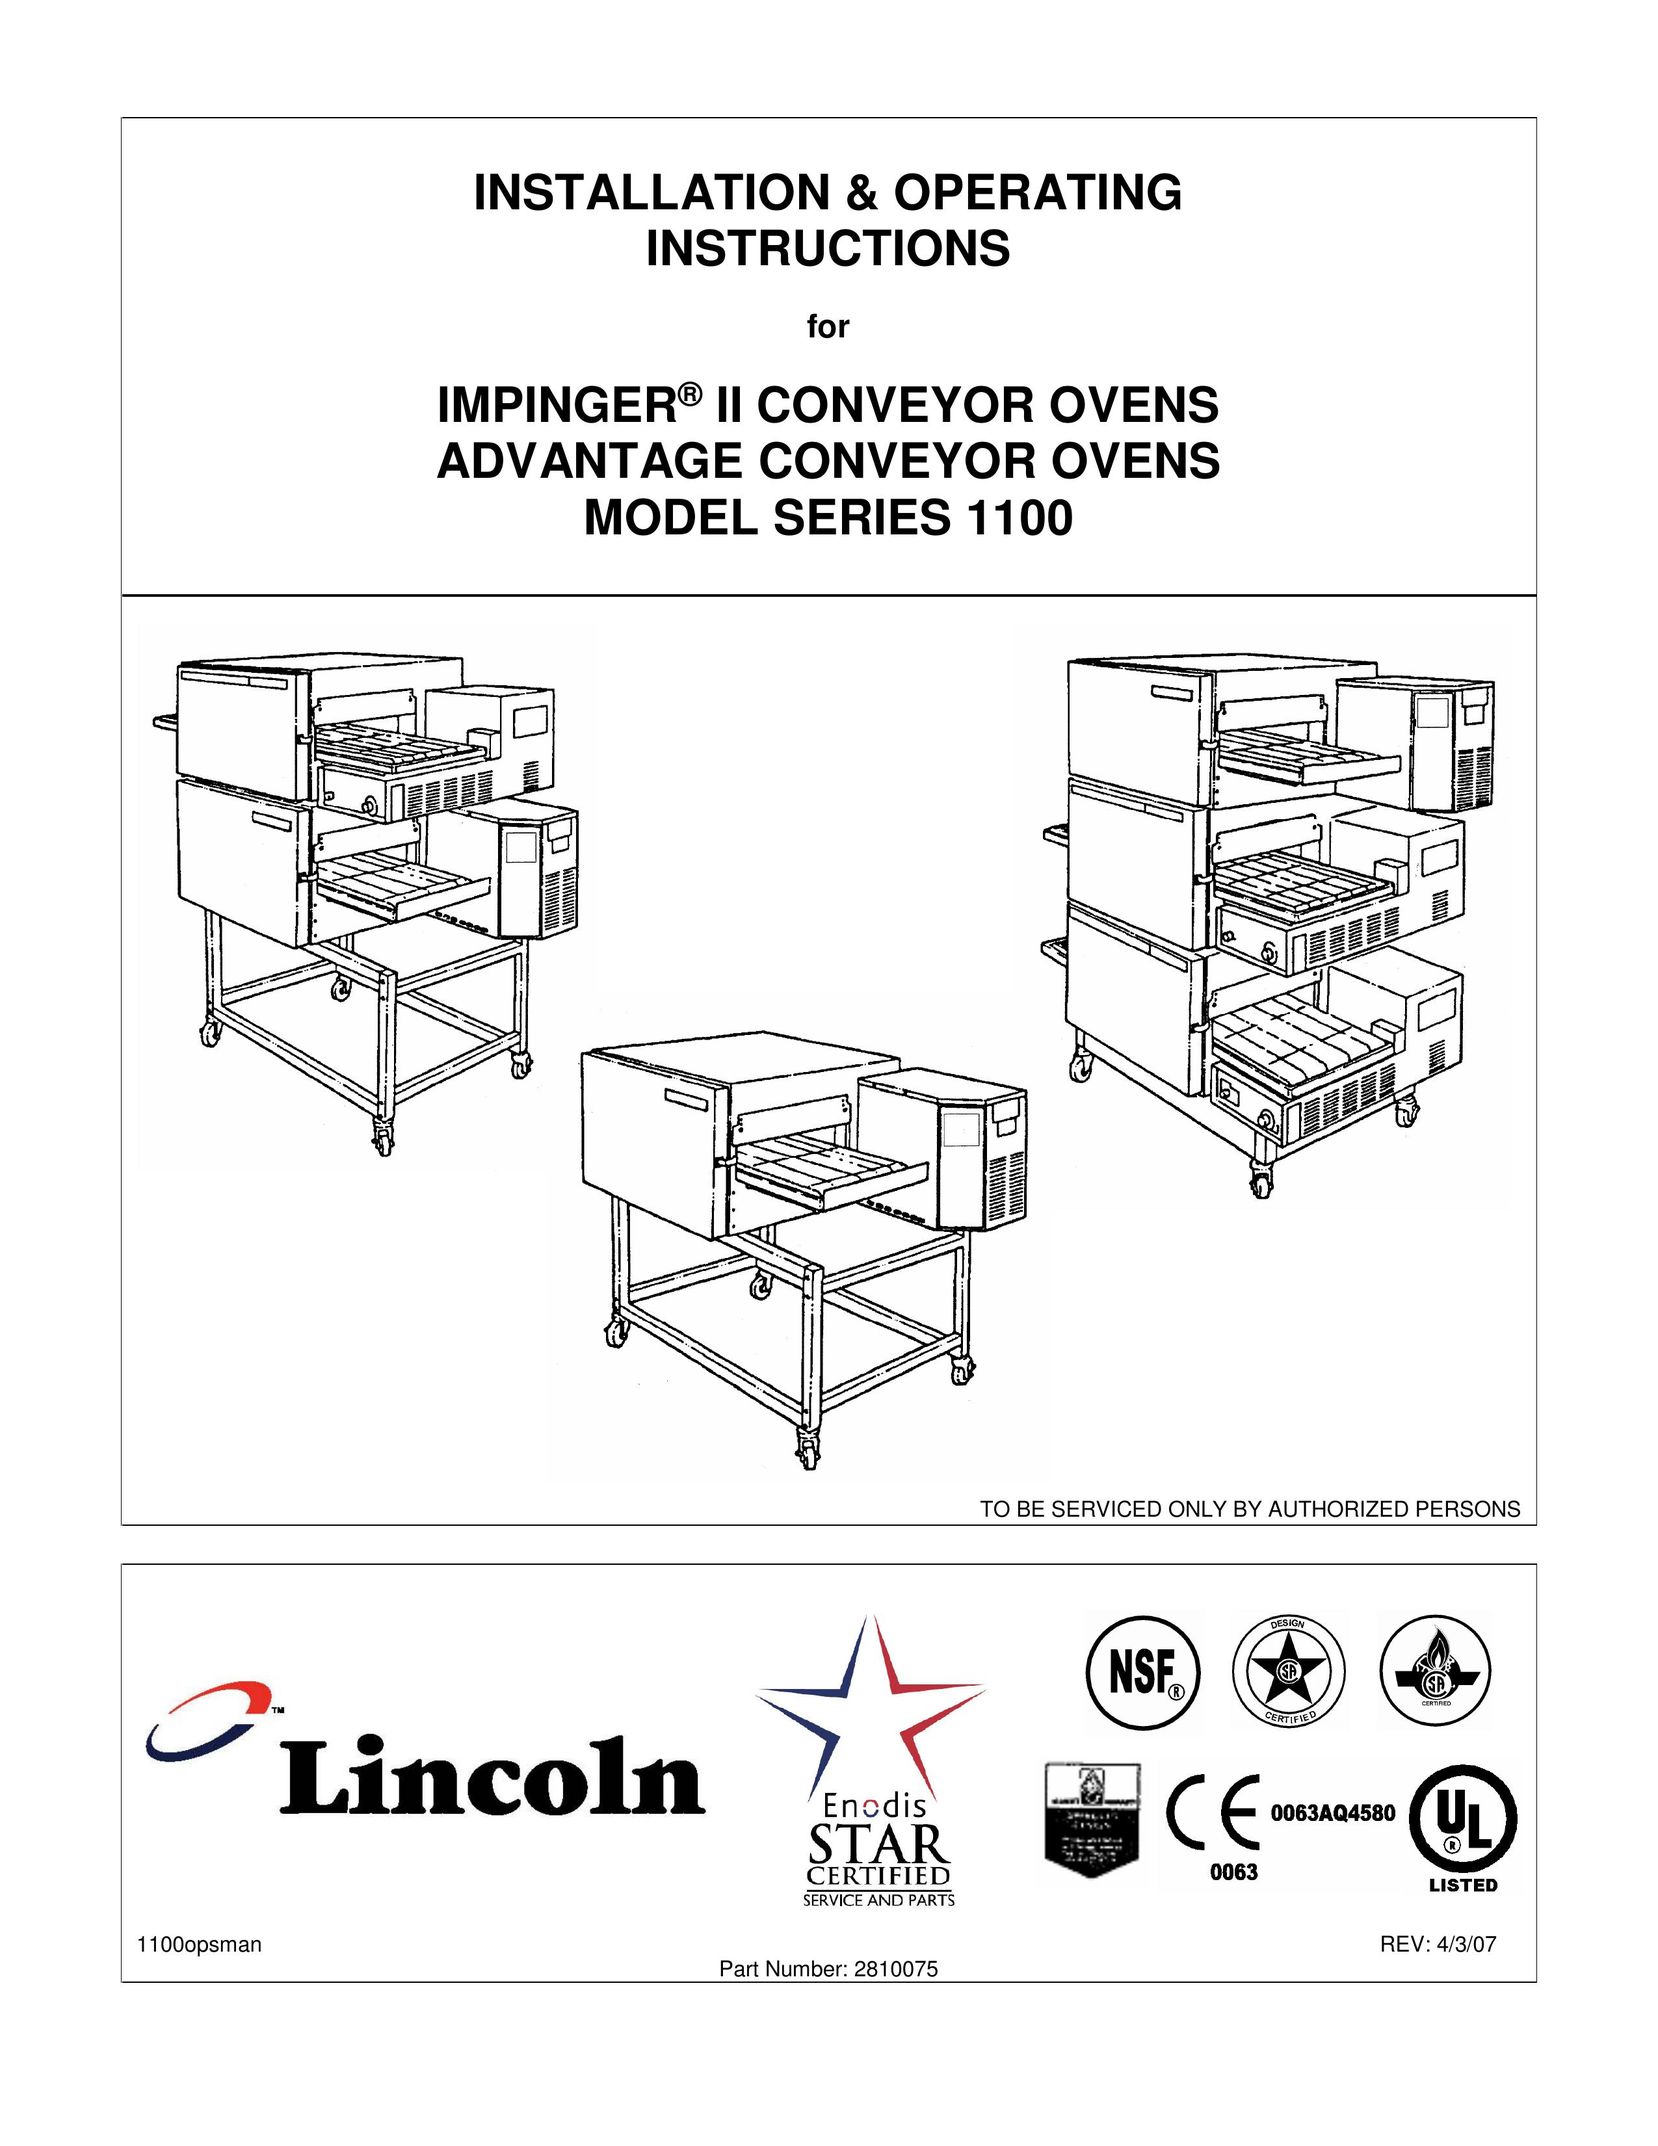 Lincoln Series 1100 Oven User Manual